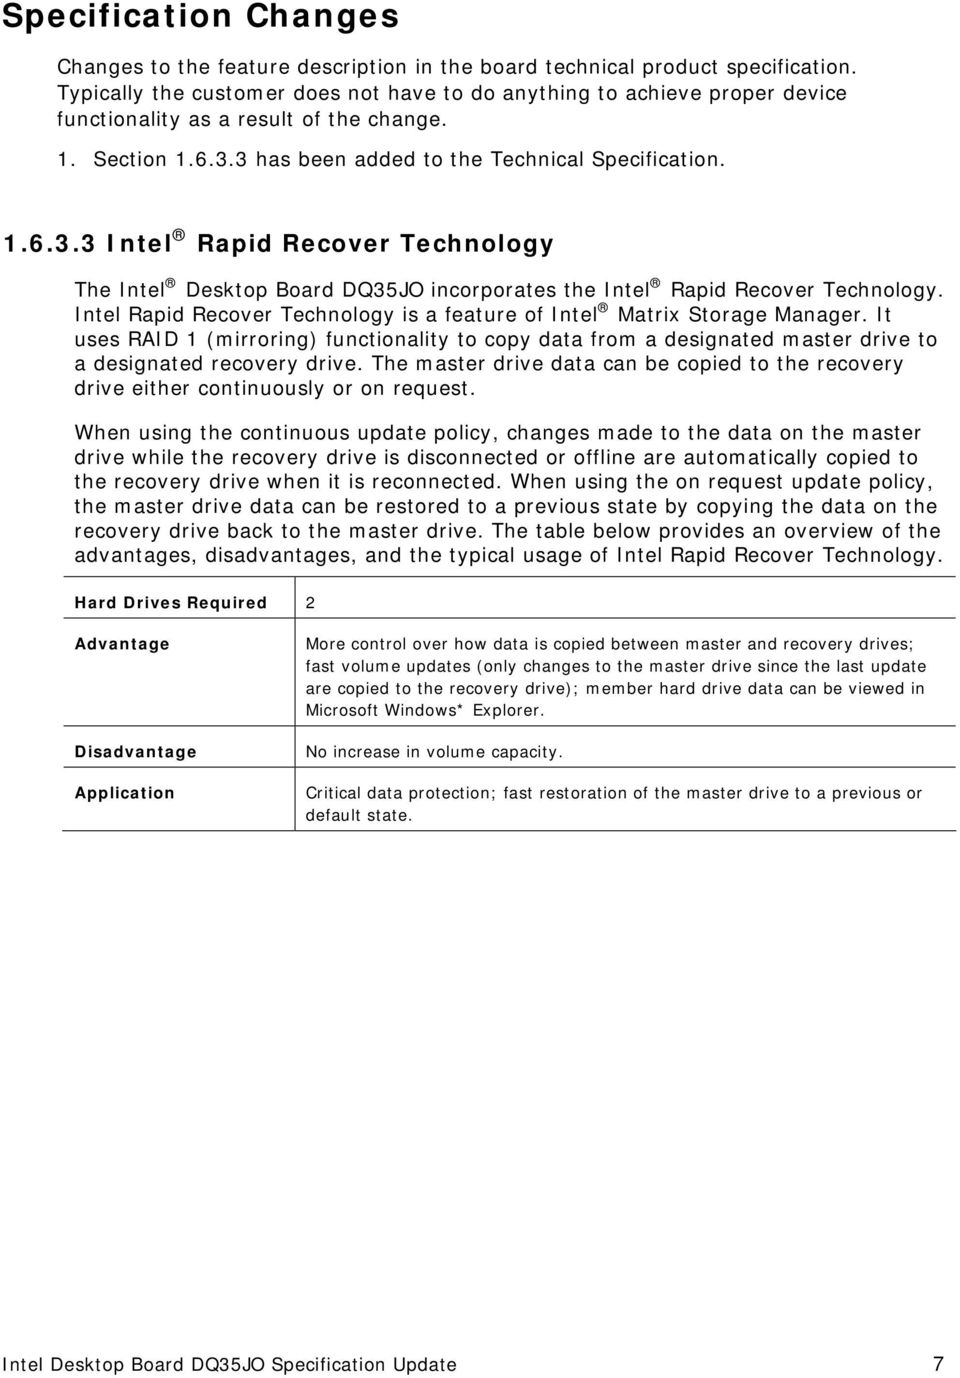 3 has been added to the Technical Specification. 1.6.3.3 Intel Rapid Recover Technology The Intel Desktop Board DQ35JO incorporates the Intel Rapid Recover Technology.